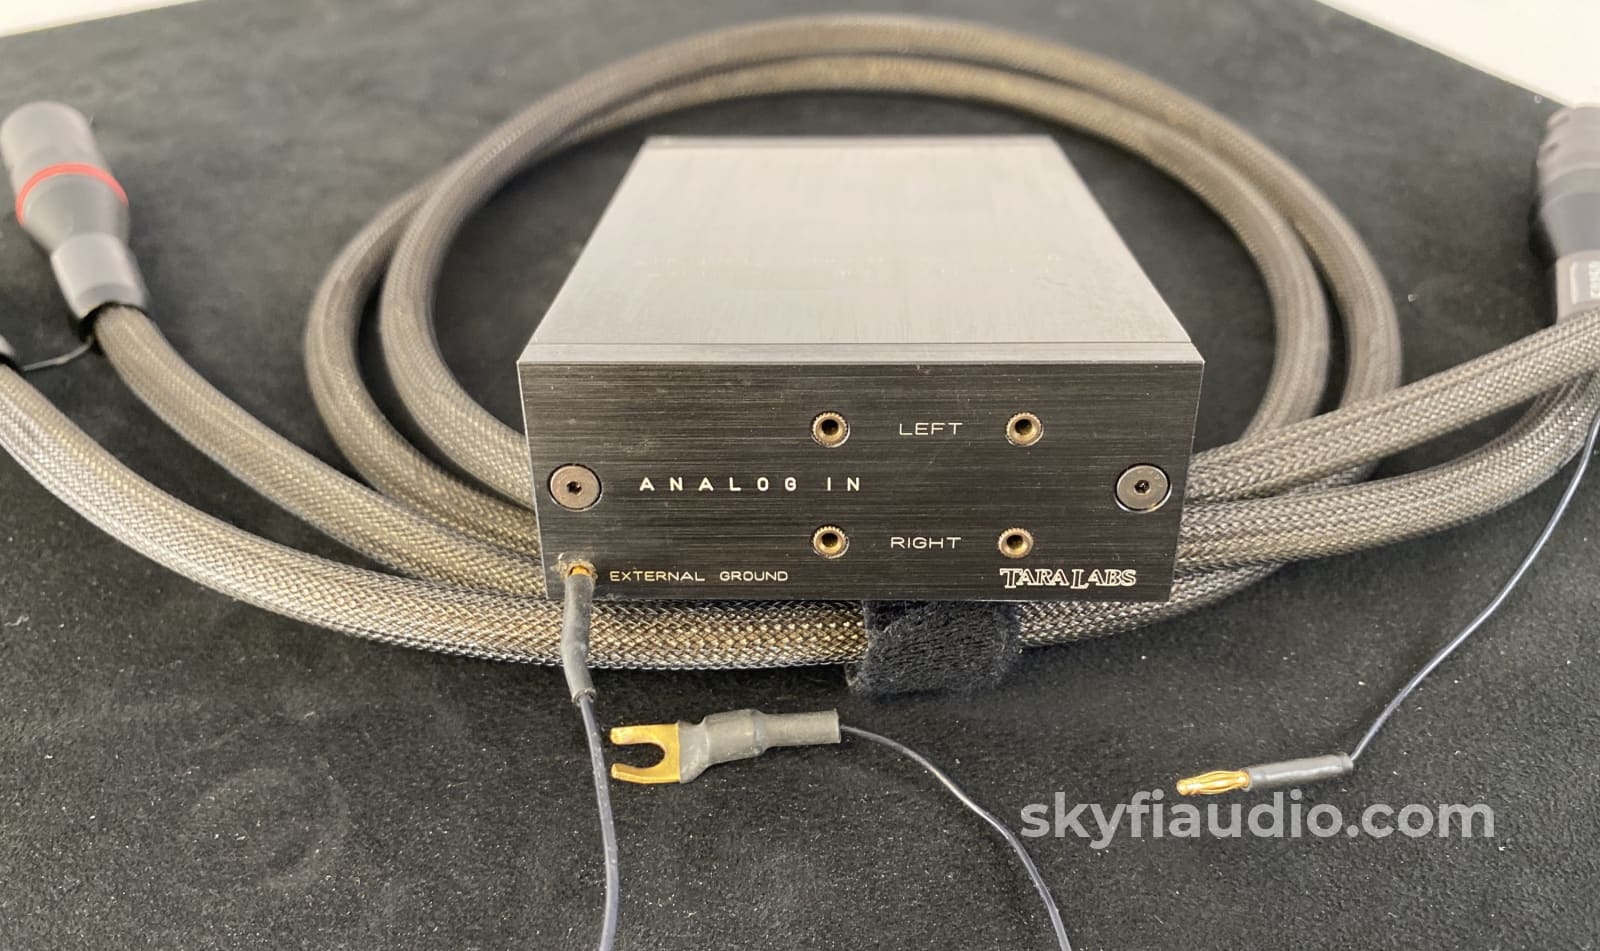 Tara Labs The One Xlr Interconnect With Isolated Matrix Ground Station - 1M Cables